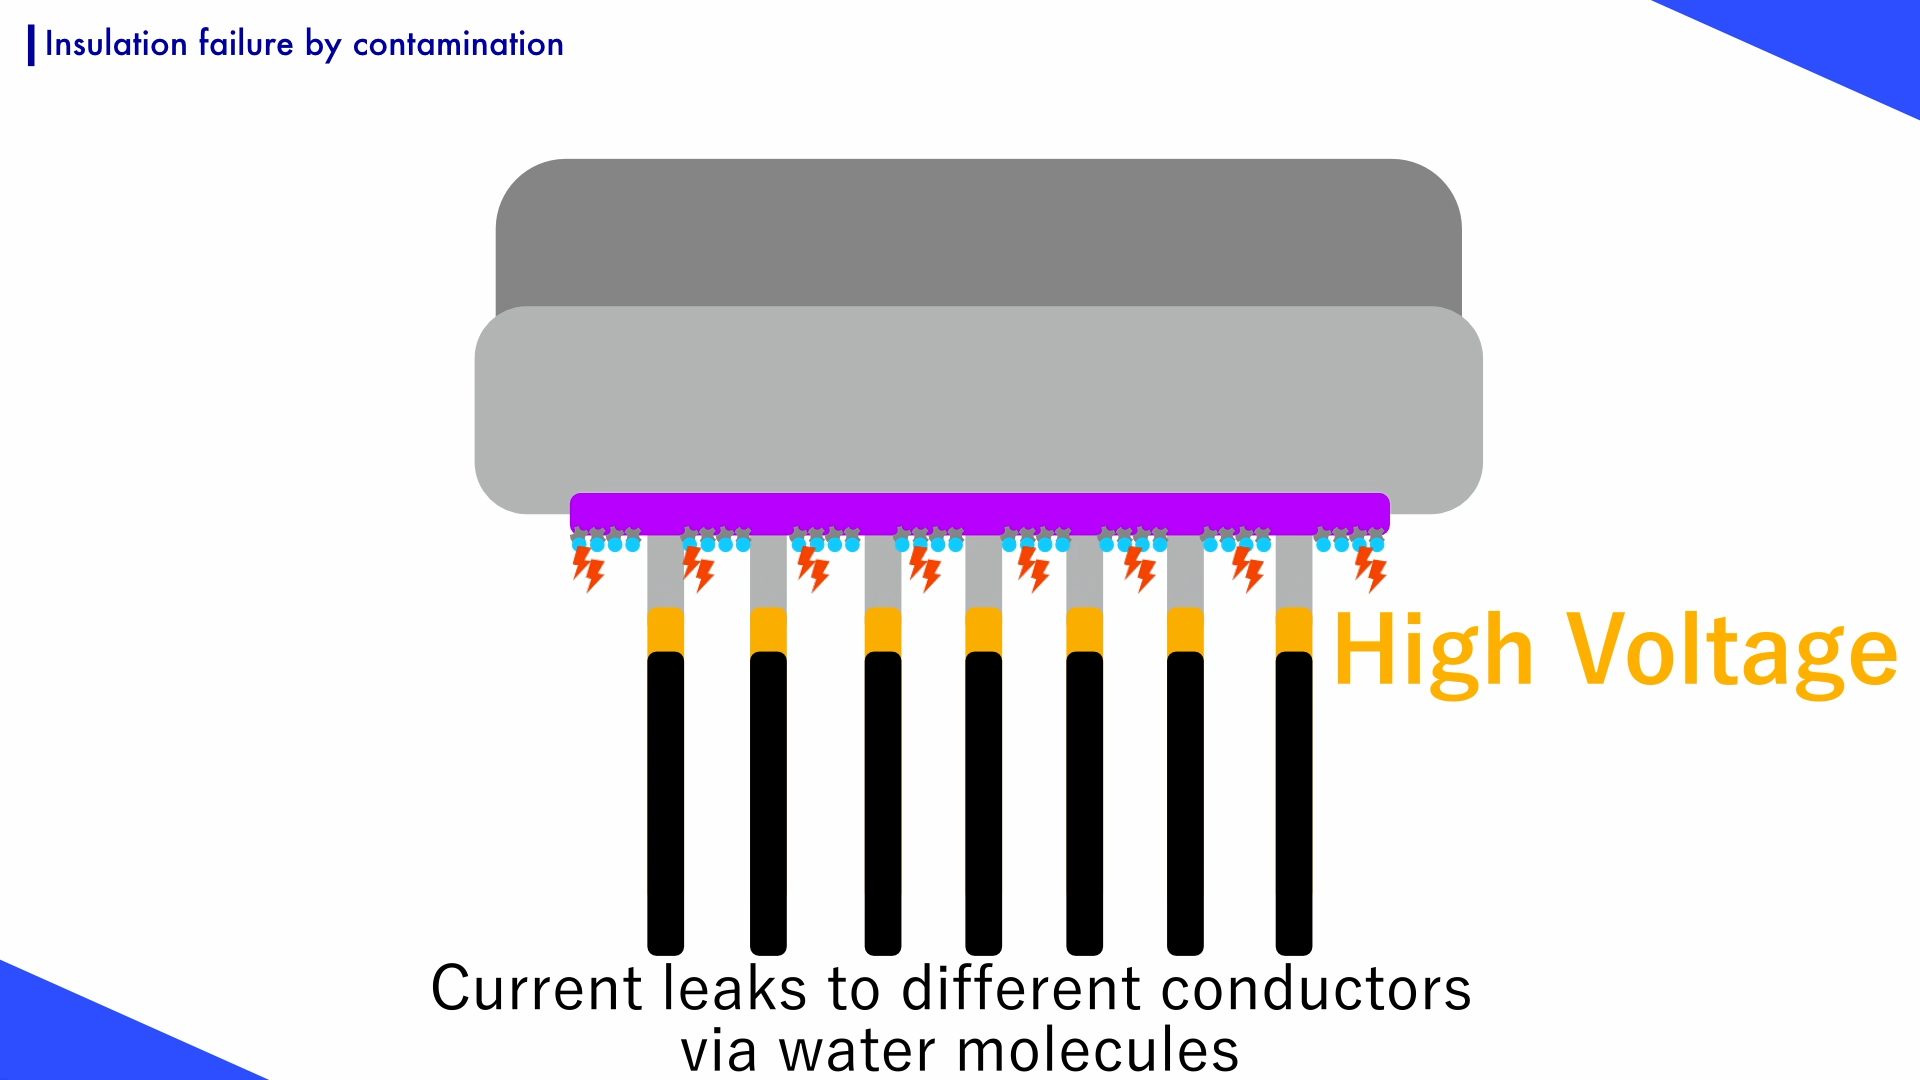 When contaminants absorb moisture, leakage current increases and insulation resistance decreases